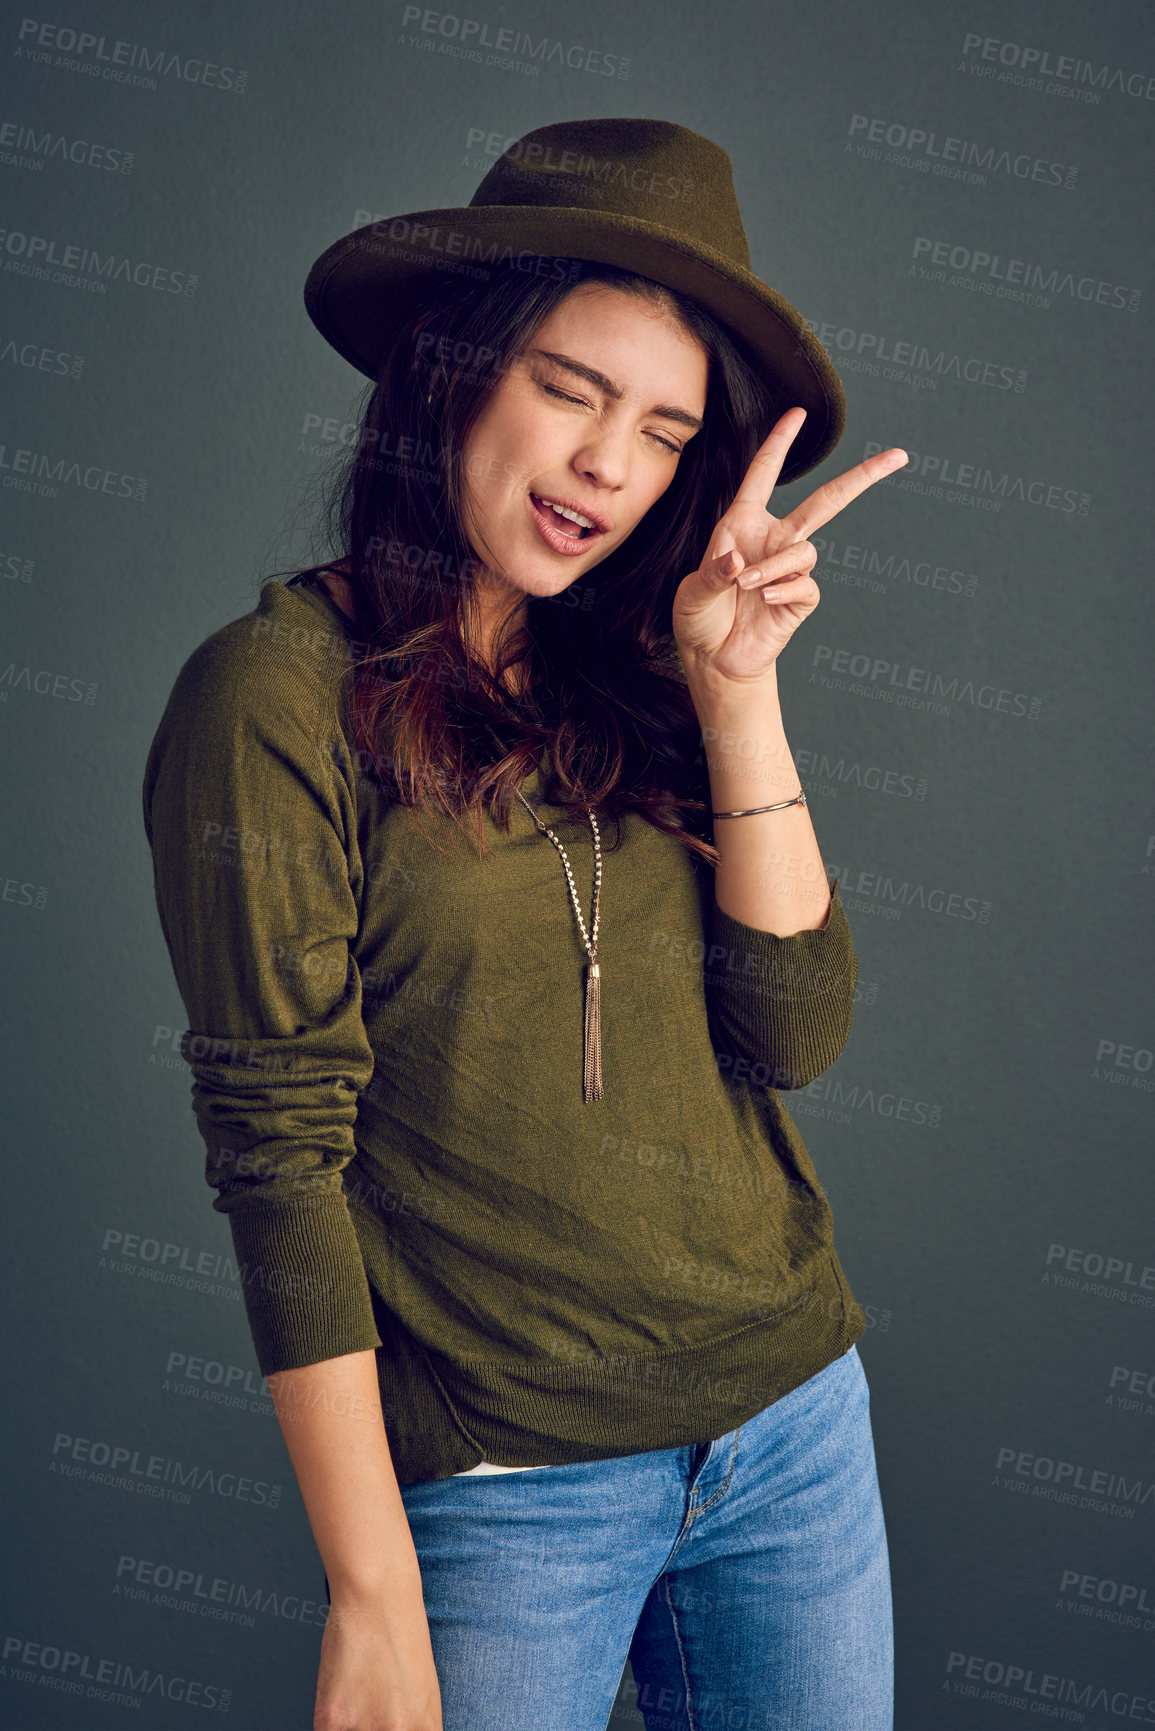 Buy stock photo Studio shot of a carefree young woman posing with a hat and showing the peace sign while standing against a dark background